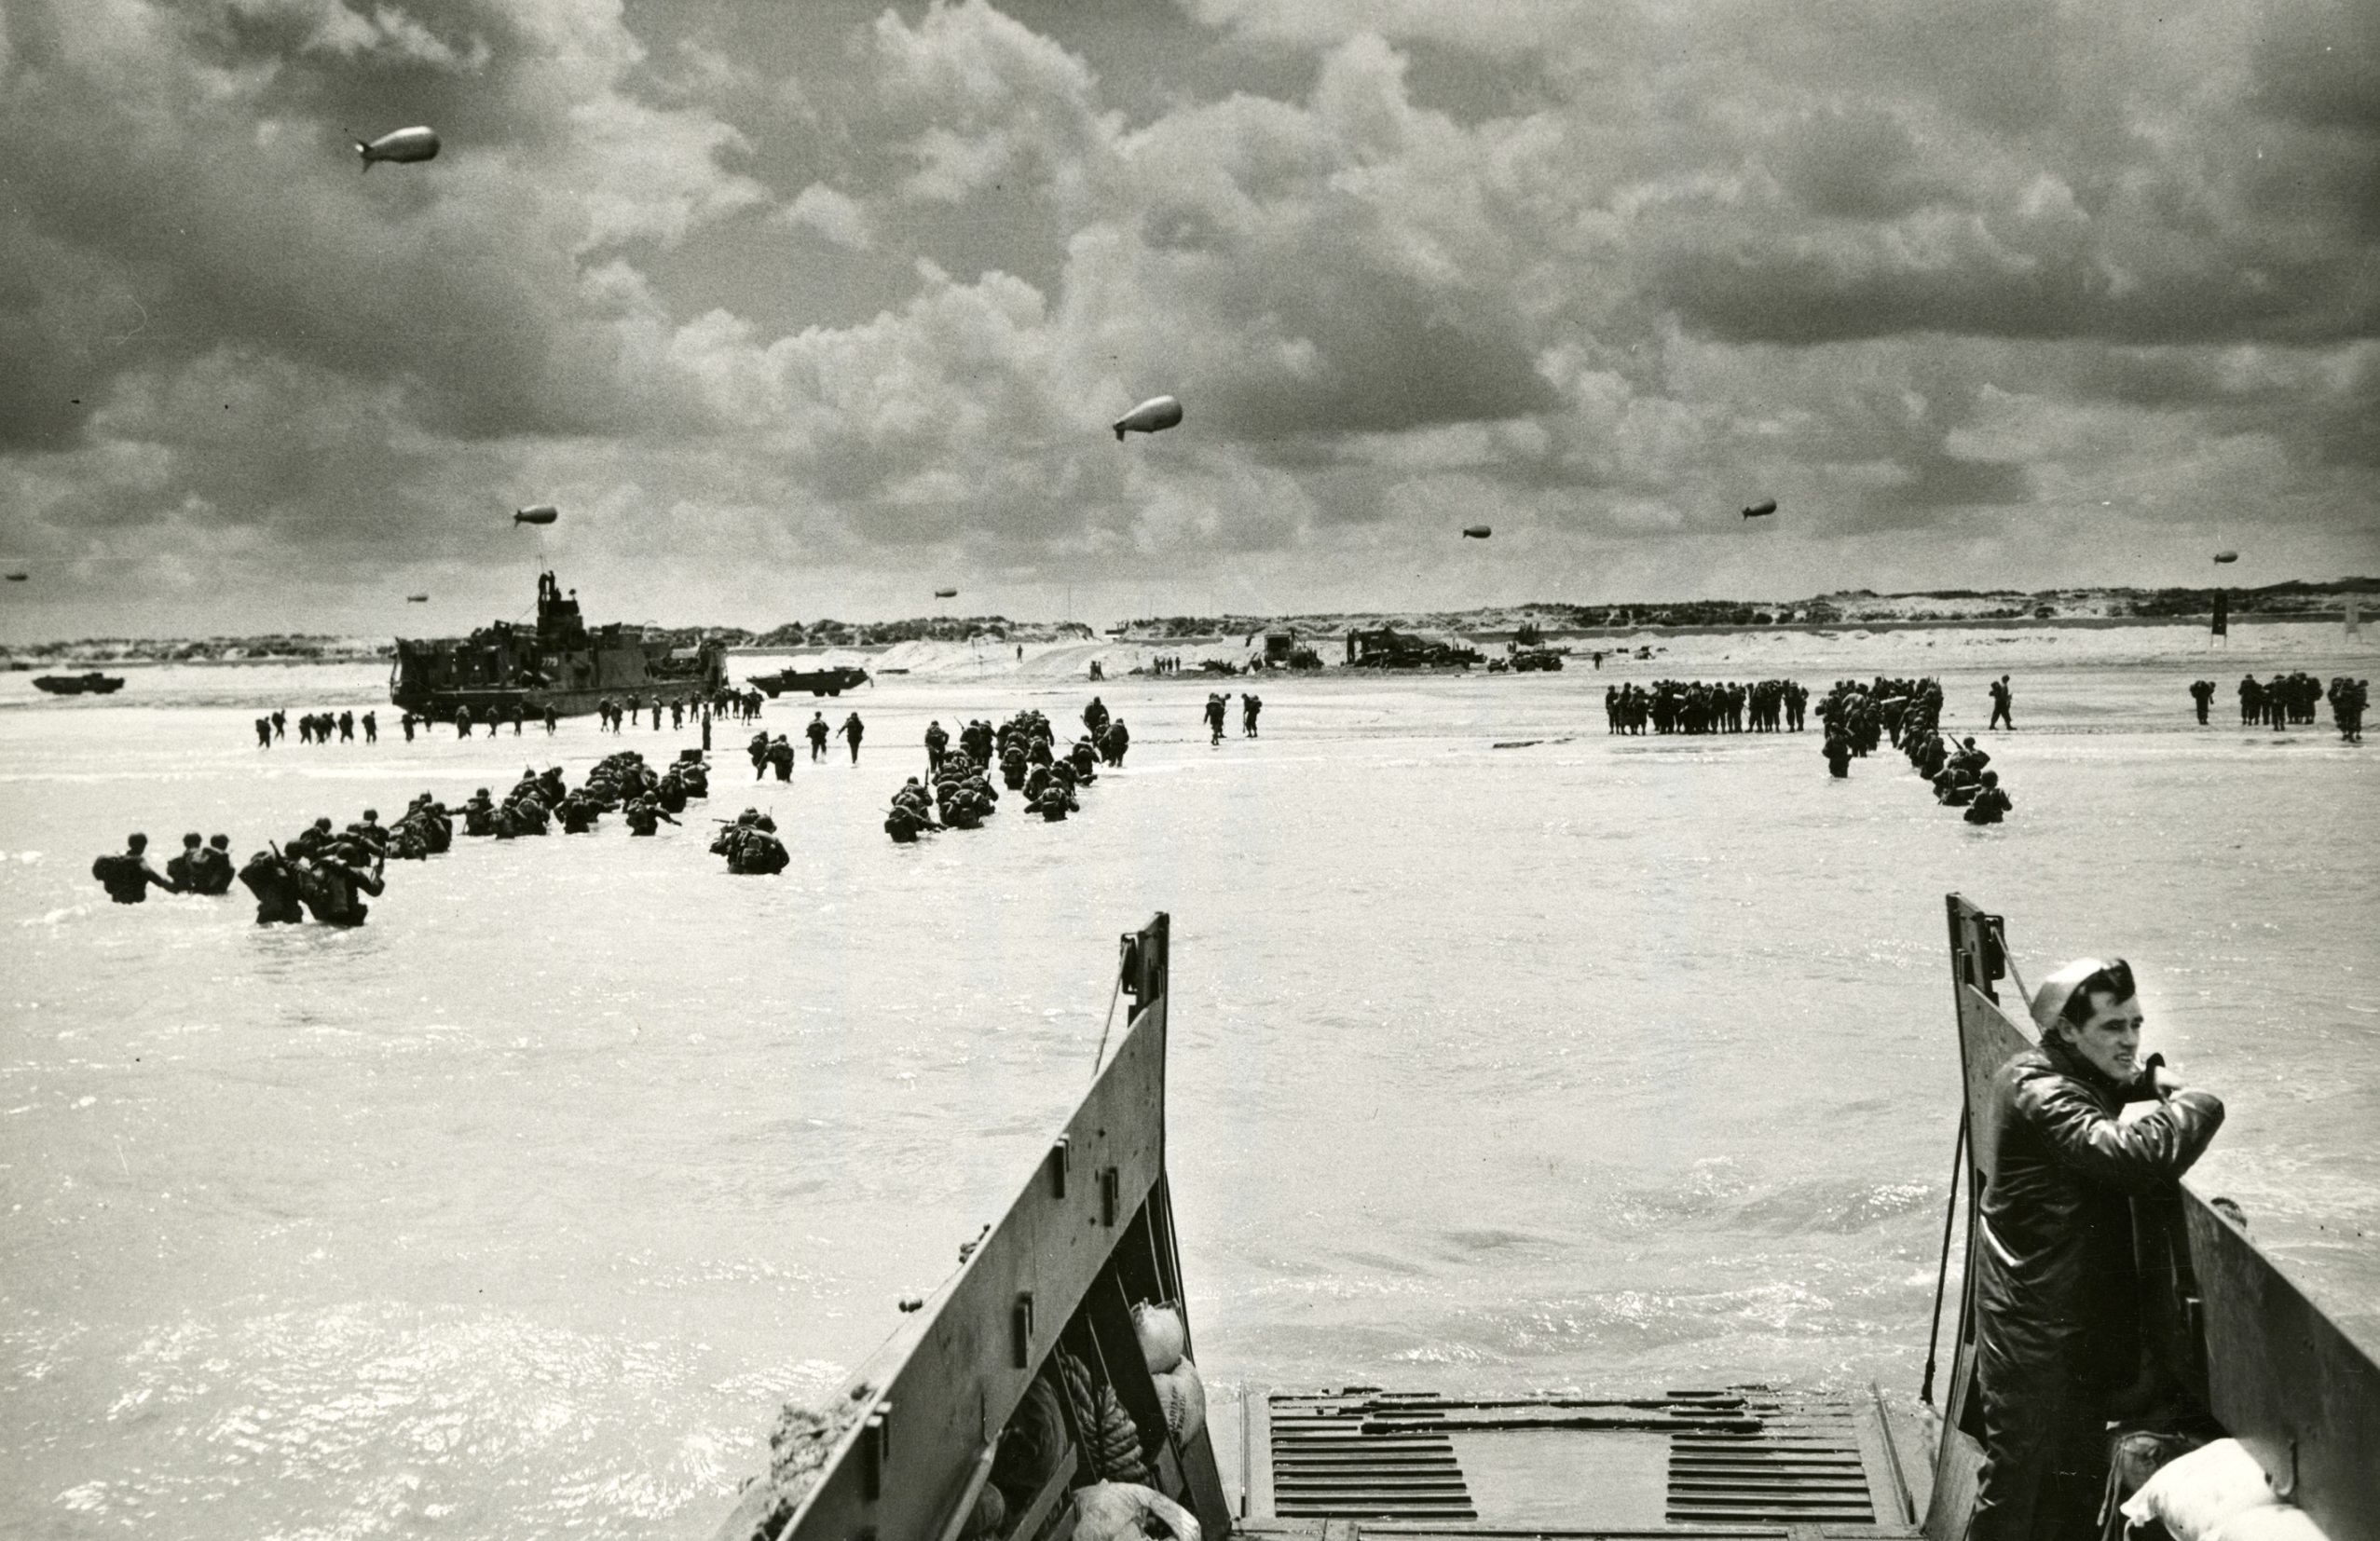 US Forces gathering on a Normandy Beach after D-Day, France 1944